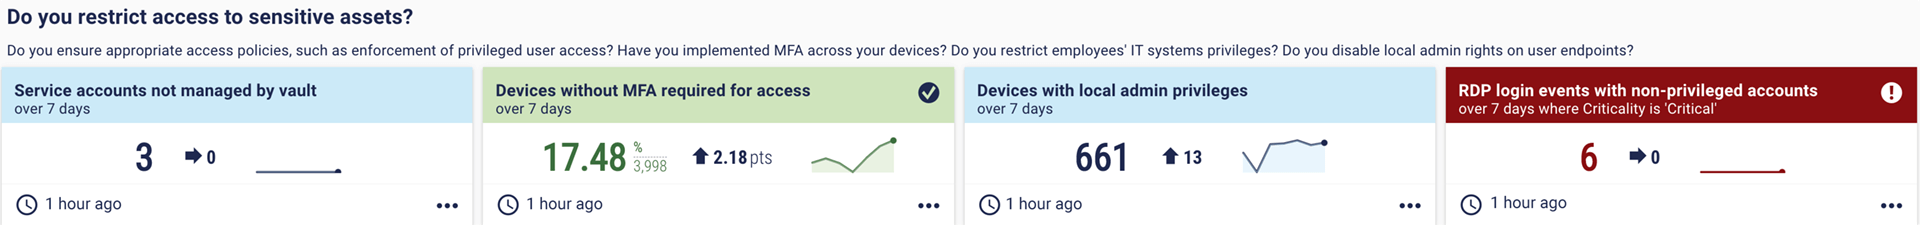 Dashboard: Do you restrict access to sensitive assets